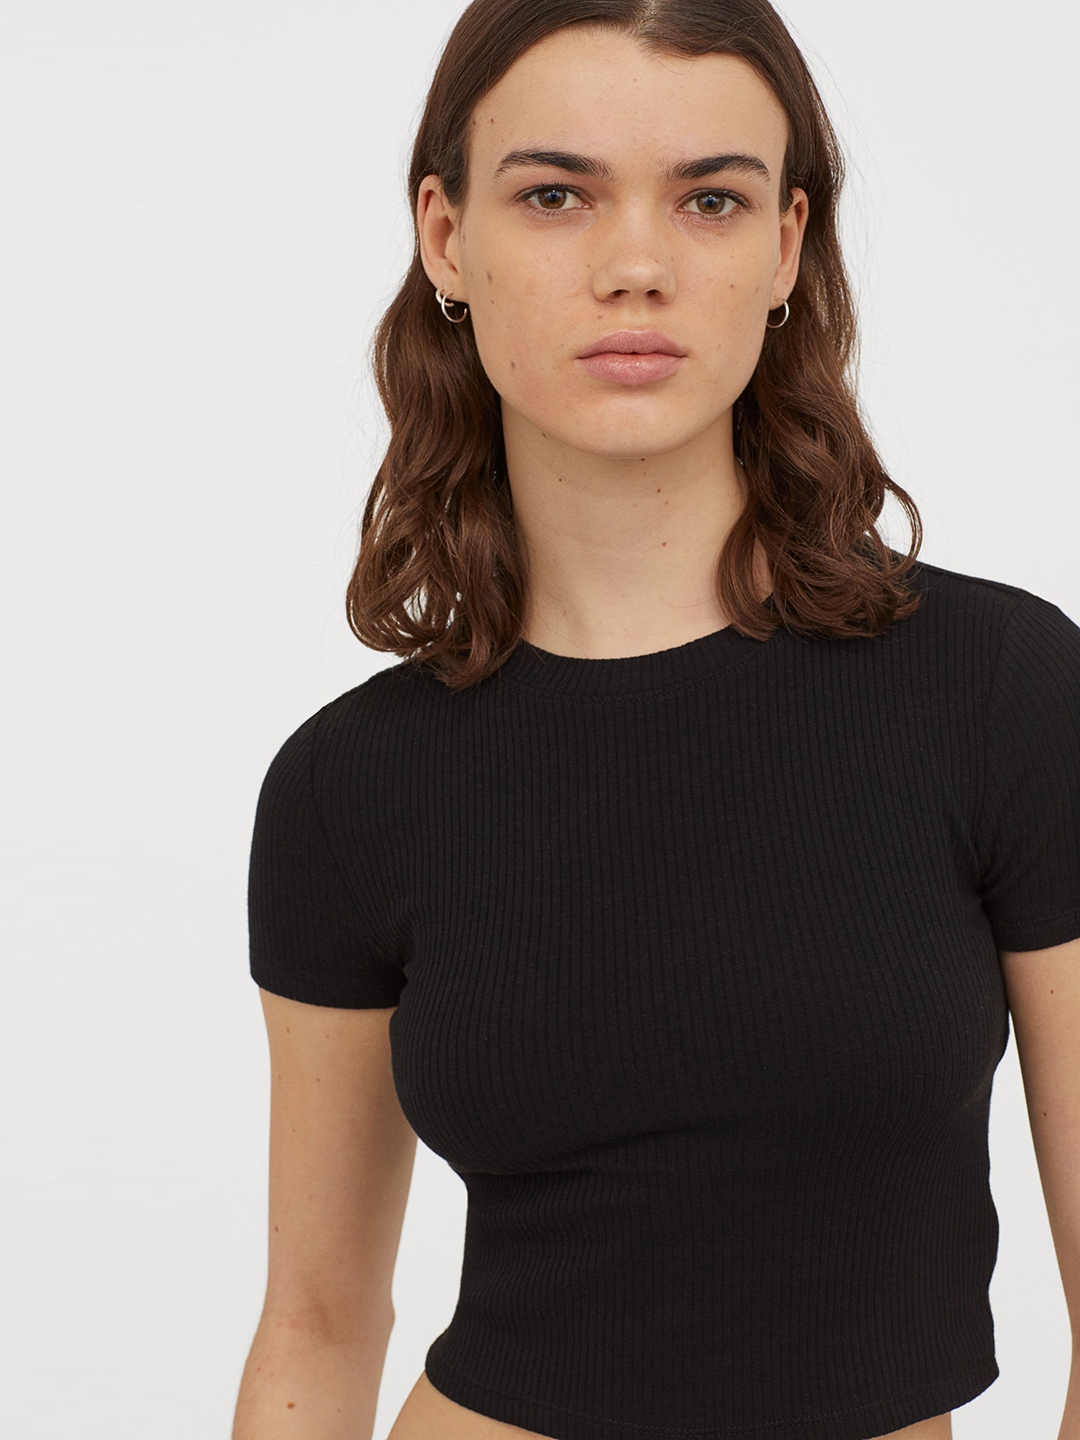 Buy H&M Women Black Solid Ribbed Top - Tops for Women 11719116 | Myntra